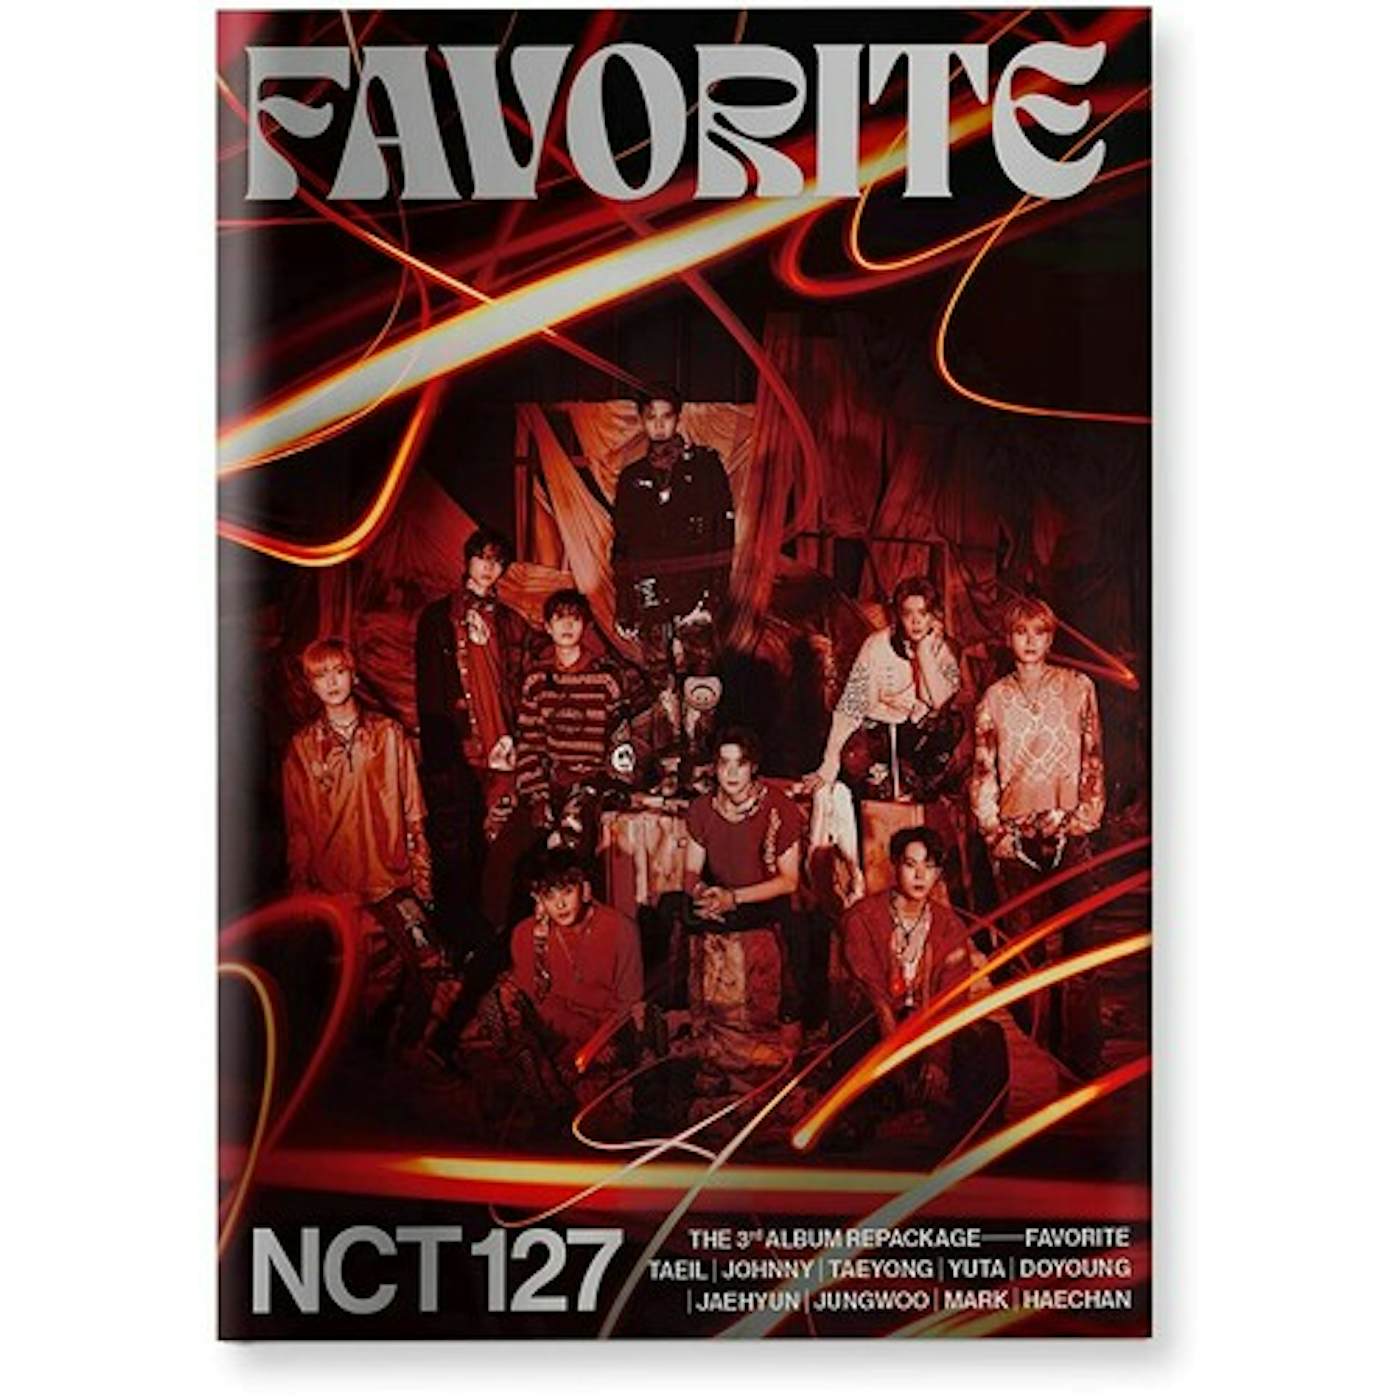 NCT 127 FAVORITE: THE 3RD ALBUM REPACKAGE (CATHARSIS VER.) CD